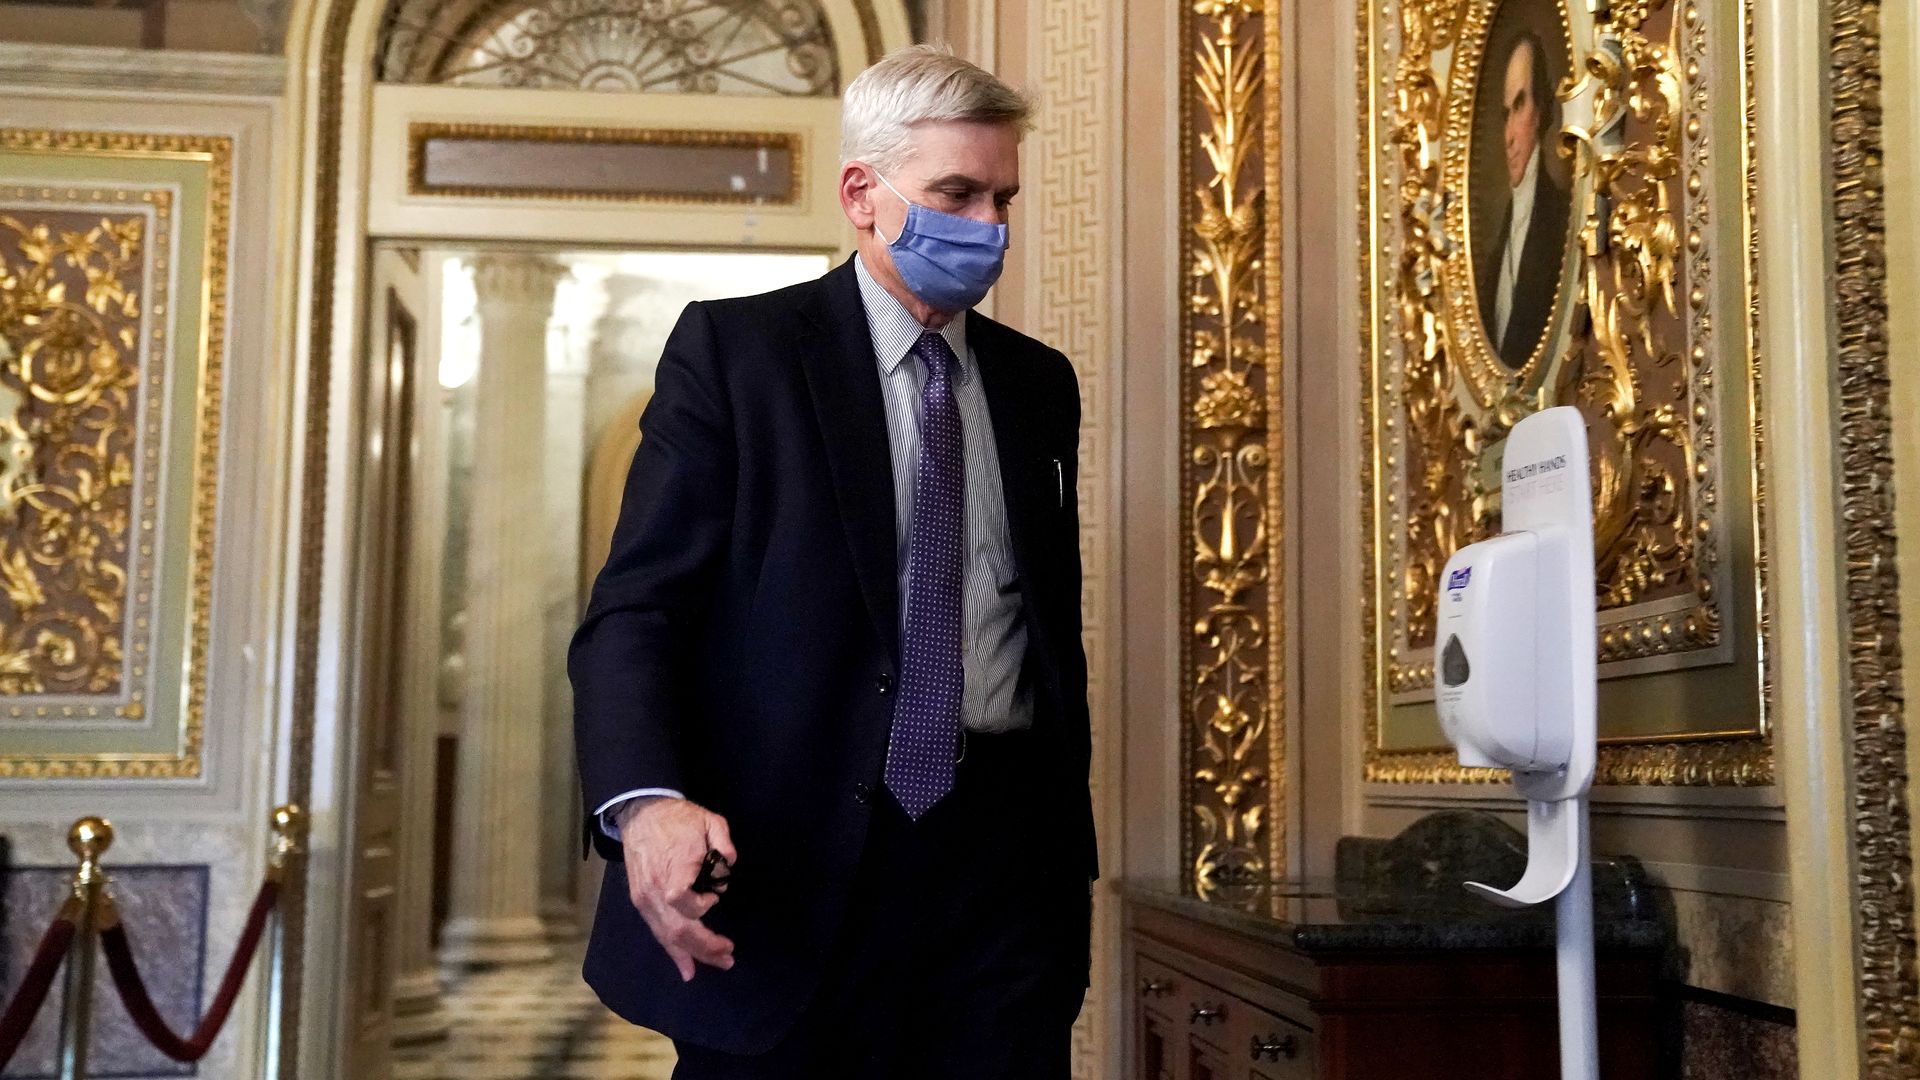 Sen. Bill Cassidy (R-LA.) is seen in the Senate Reception Room during the fifth day of the impeachment trial of former President Donald Trump on Capitol Hill on February 13